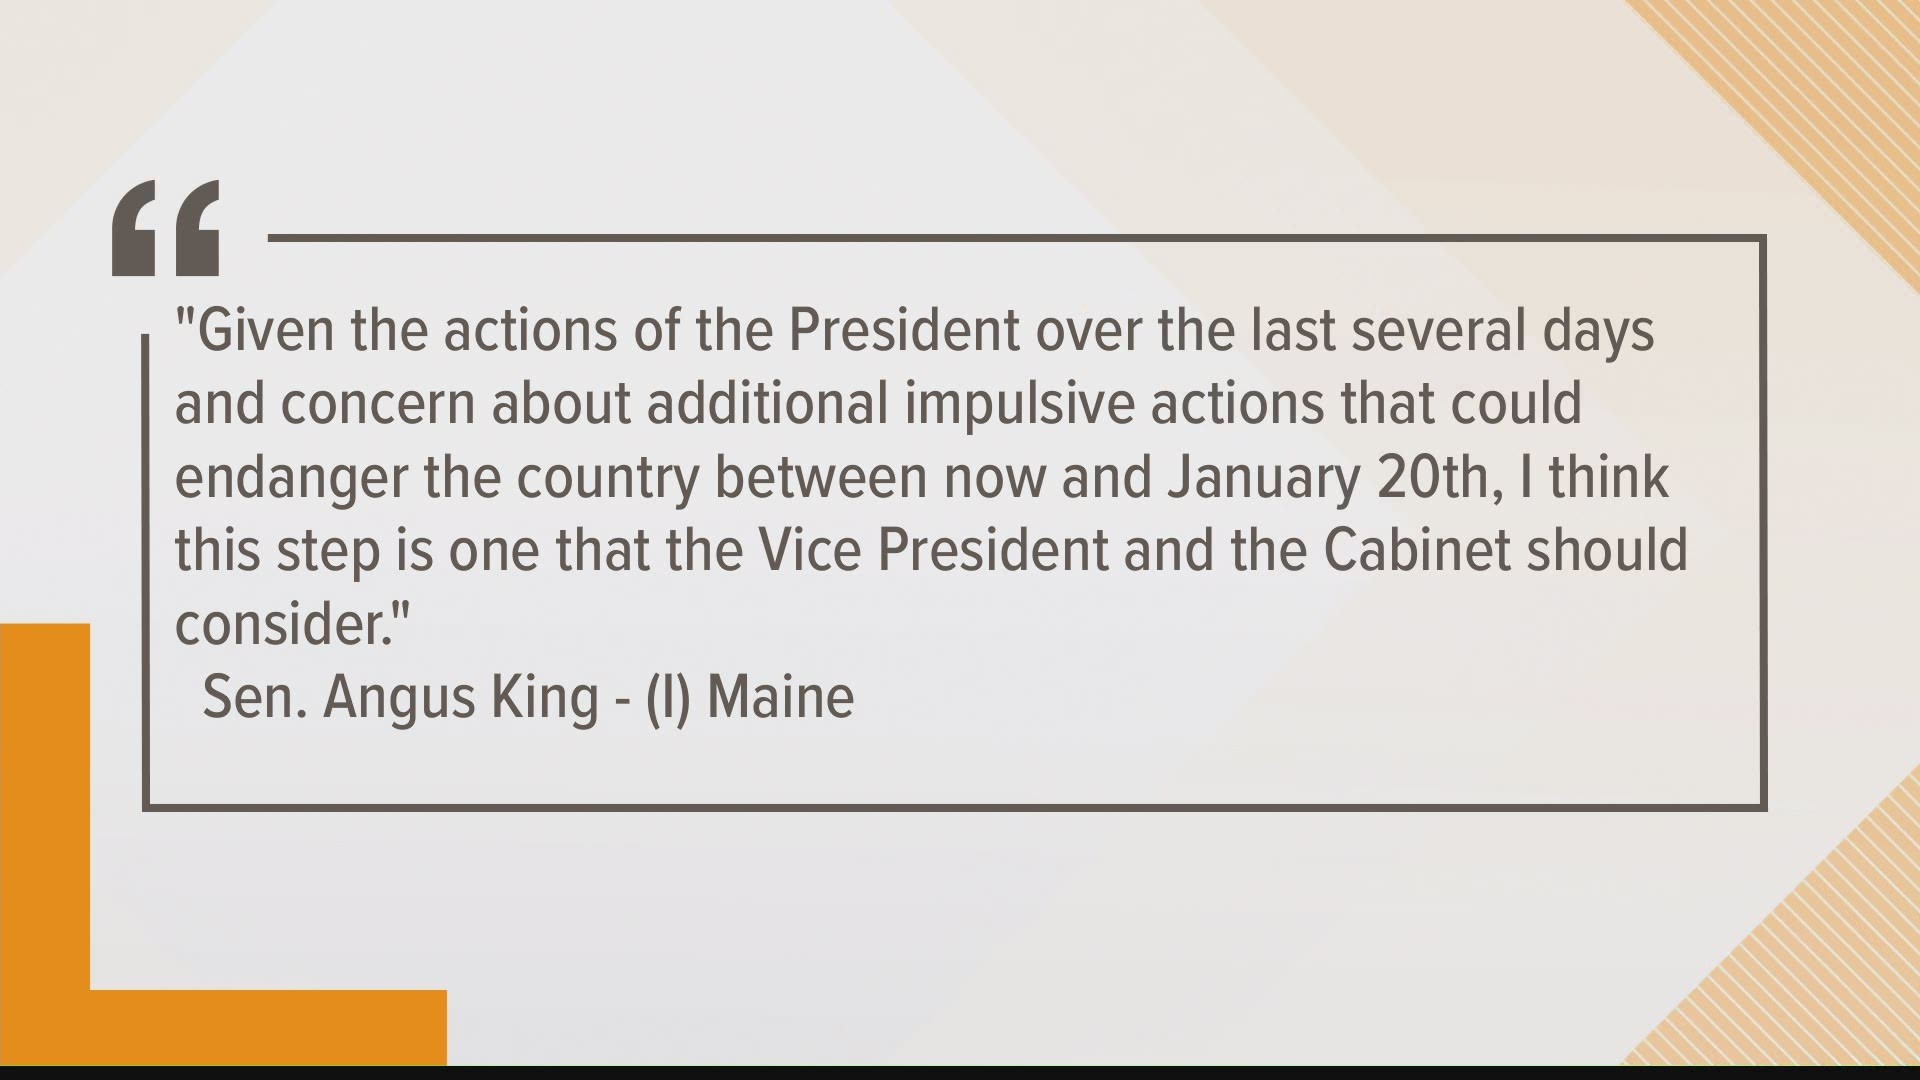 The removal of Pres. Trump is supported by both Rep. Chellie Pingree and Sen. Angus King, which would require VP Pence and current cabinet members to vote.